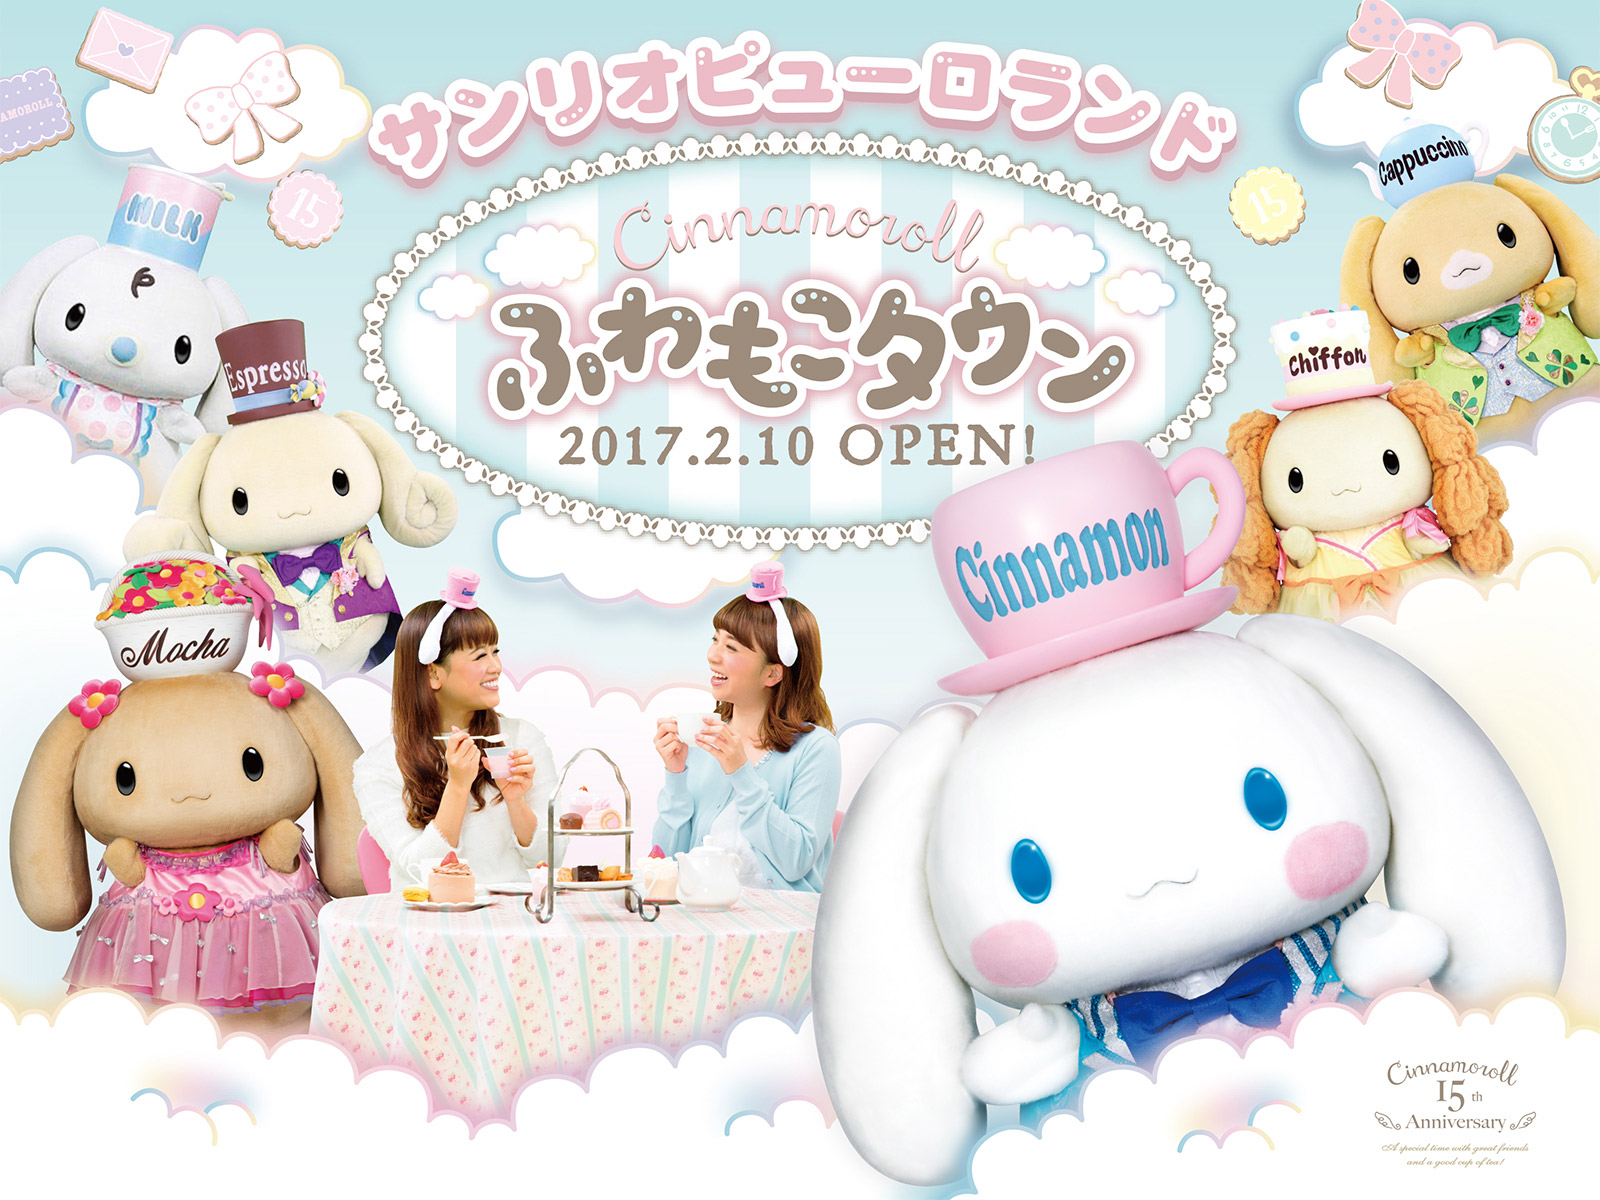 Let's celebrate the 15th anniversary of a popular character Cinnamoroll together! Sanrio Puroland will host his anniversary event